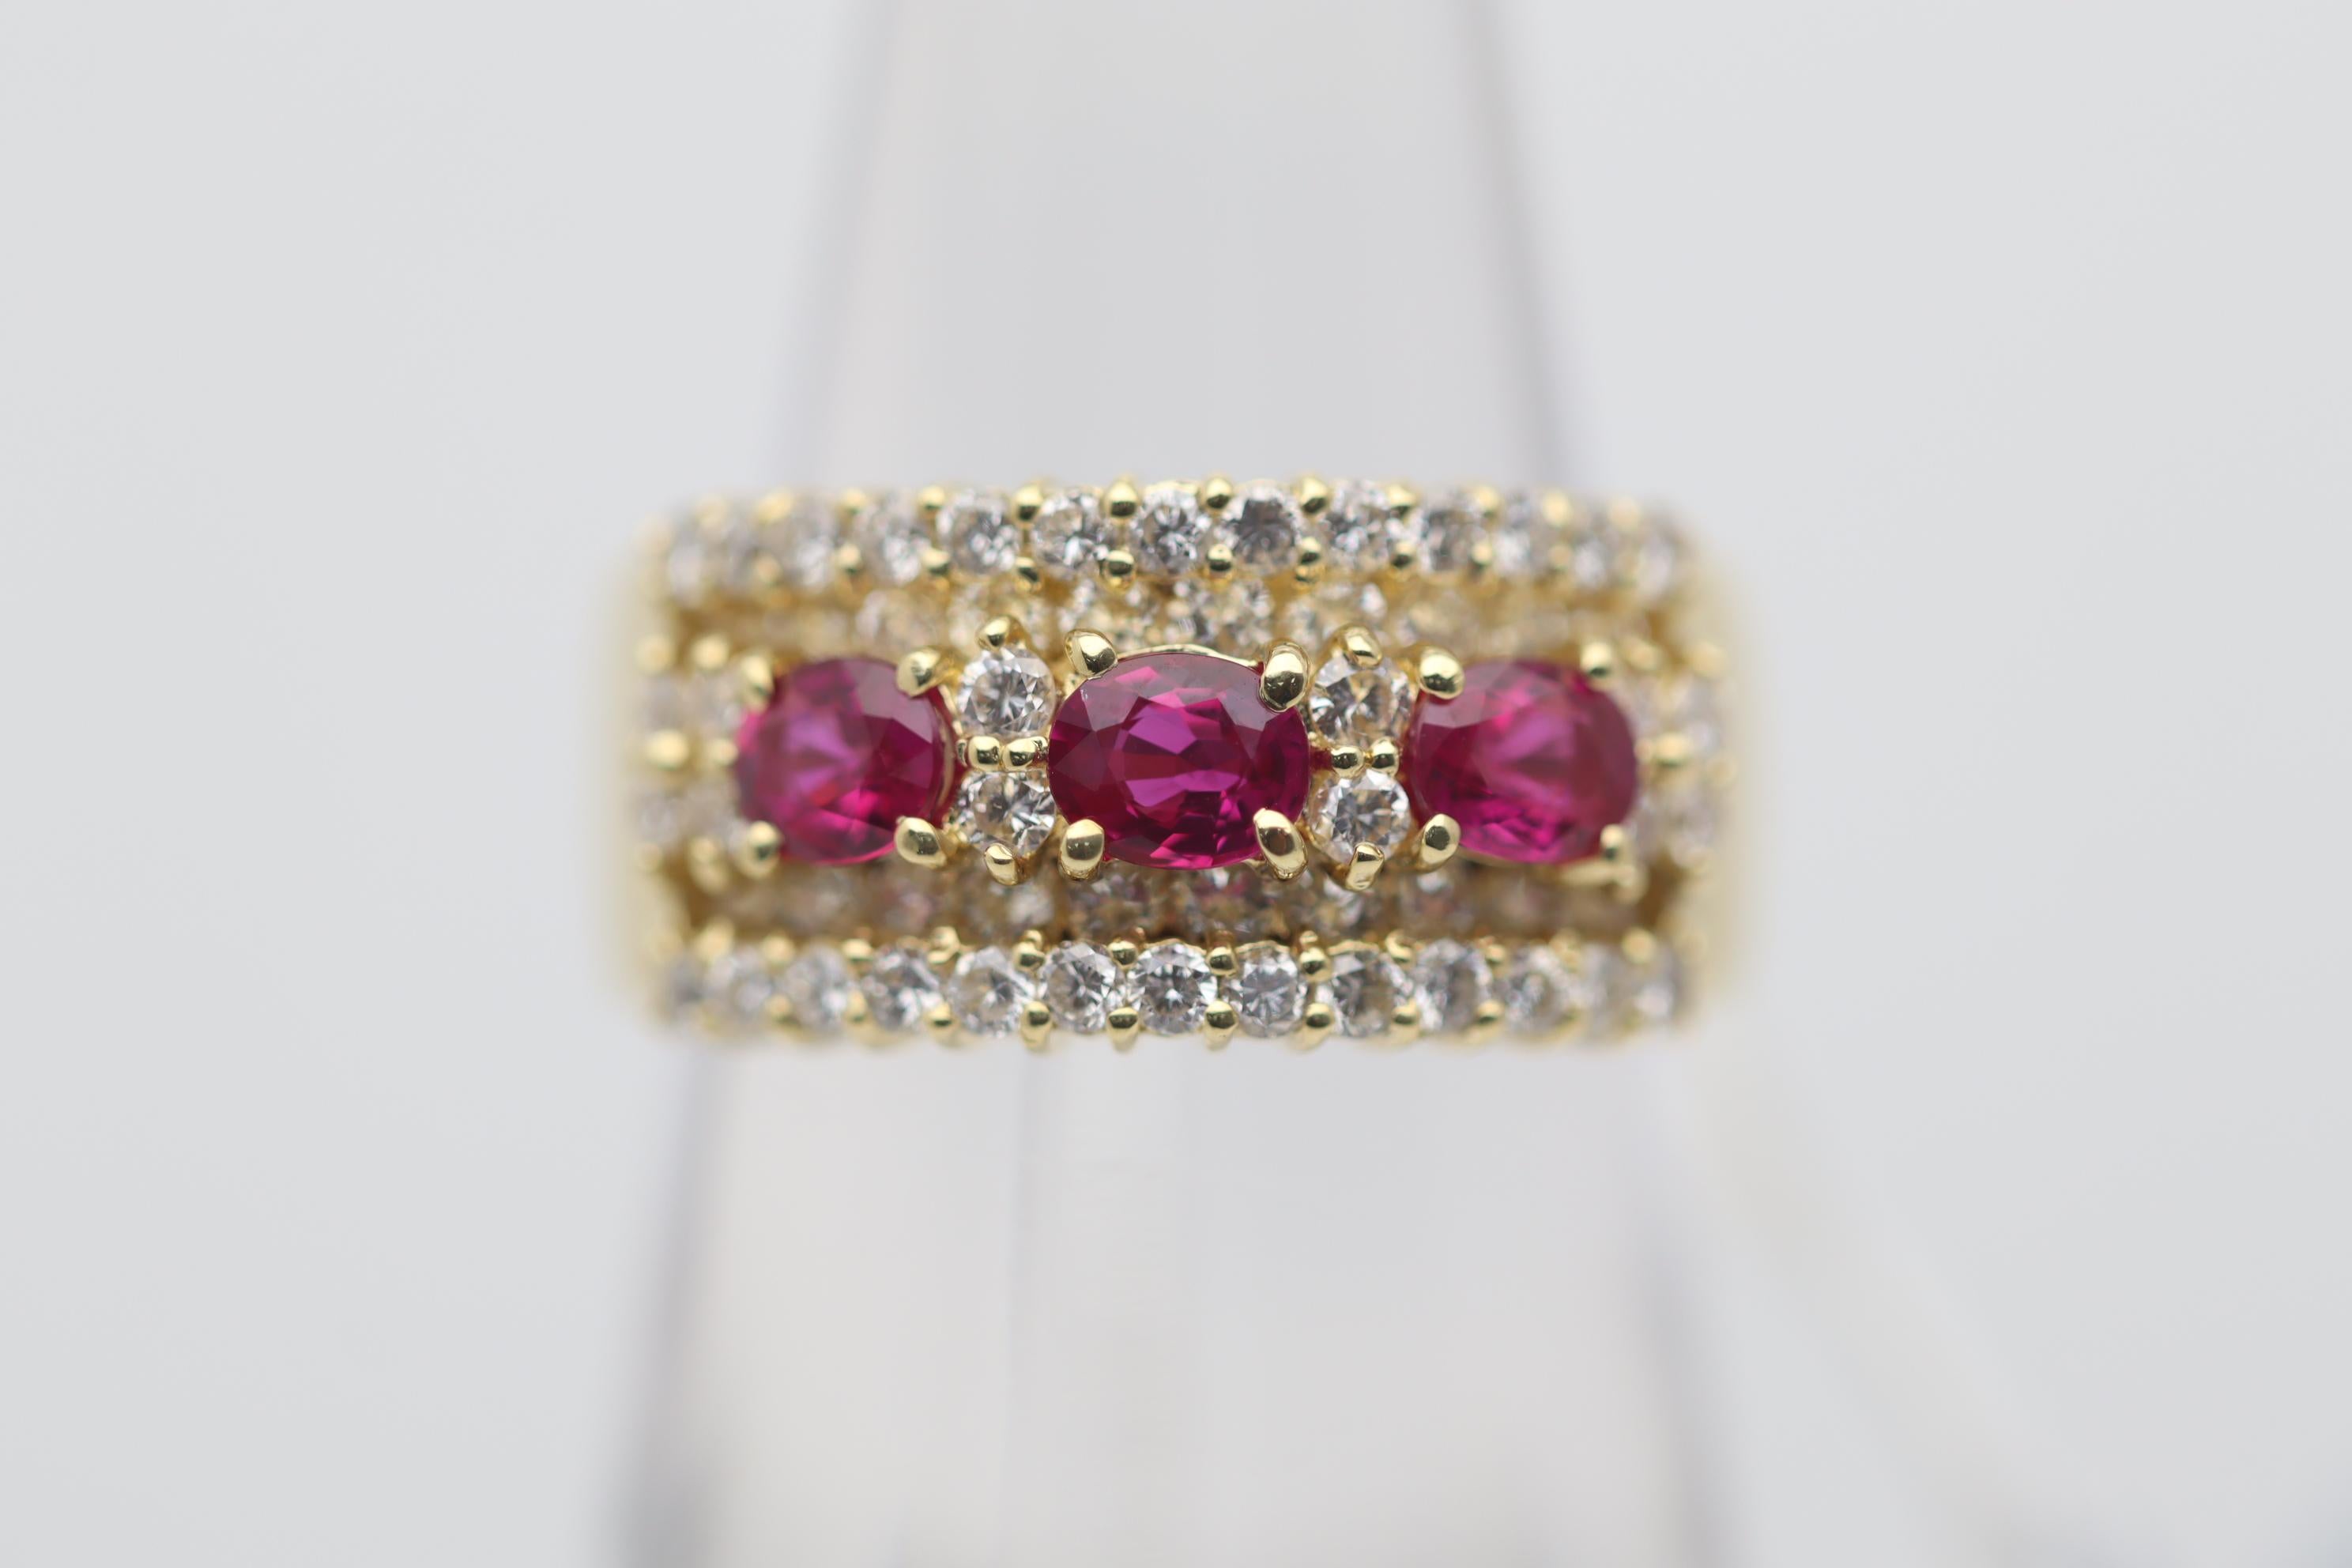 A chic and sexy ring featuring 3 gem quality vivid red rubies. The rubies weigh a total of 1.01 carats and each have an intense pigeon blood color with excellent brilliance. They are complemented by 1.17 carats of round brilliant-cut diamonds set